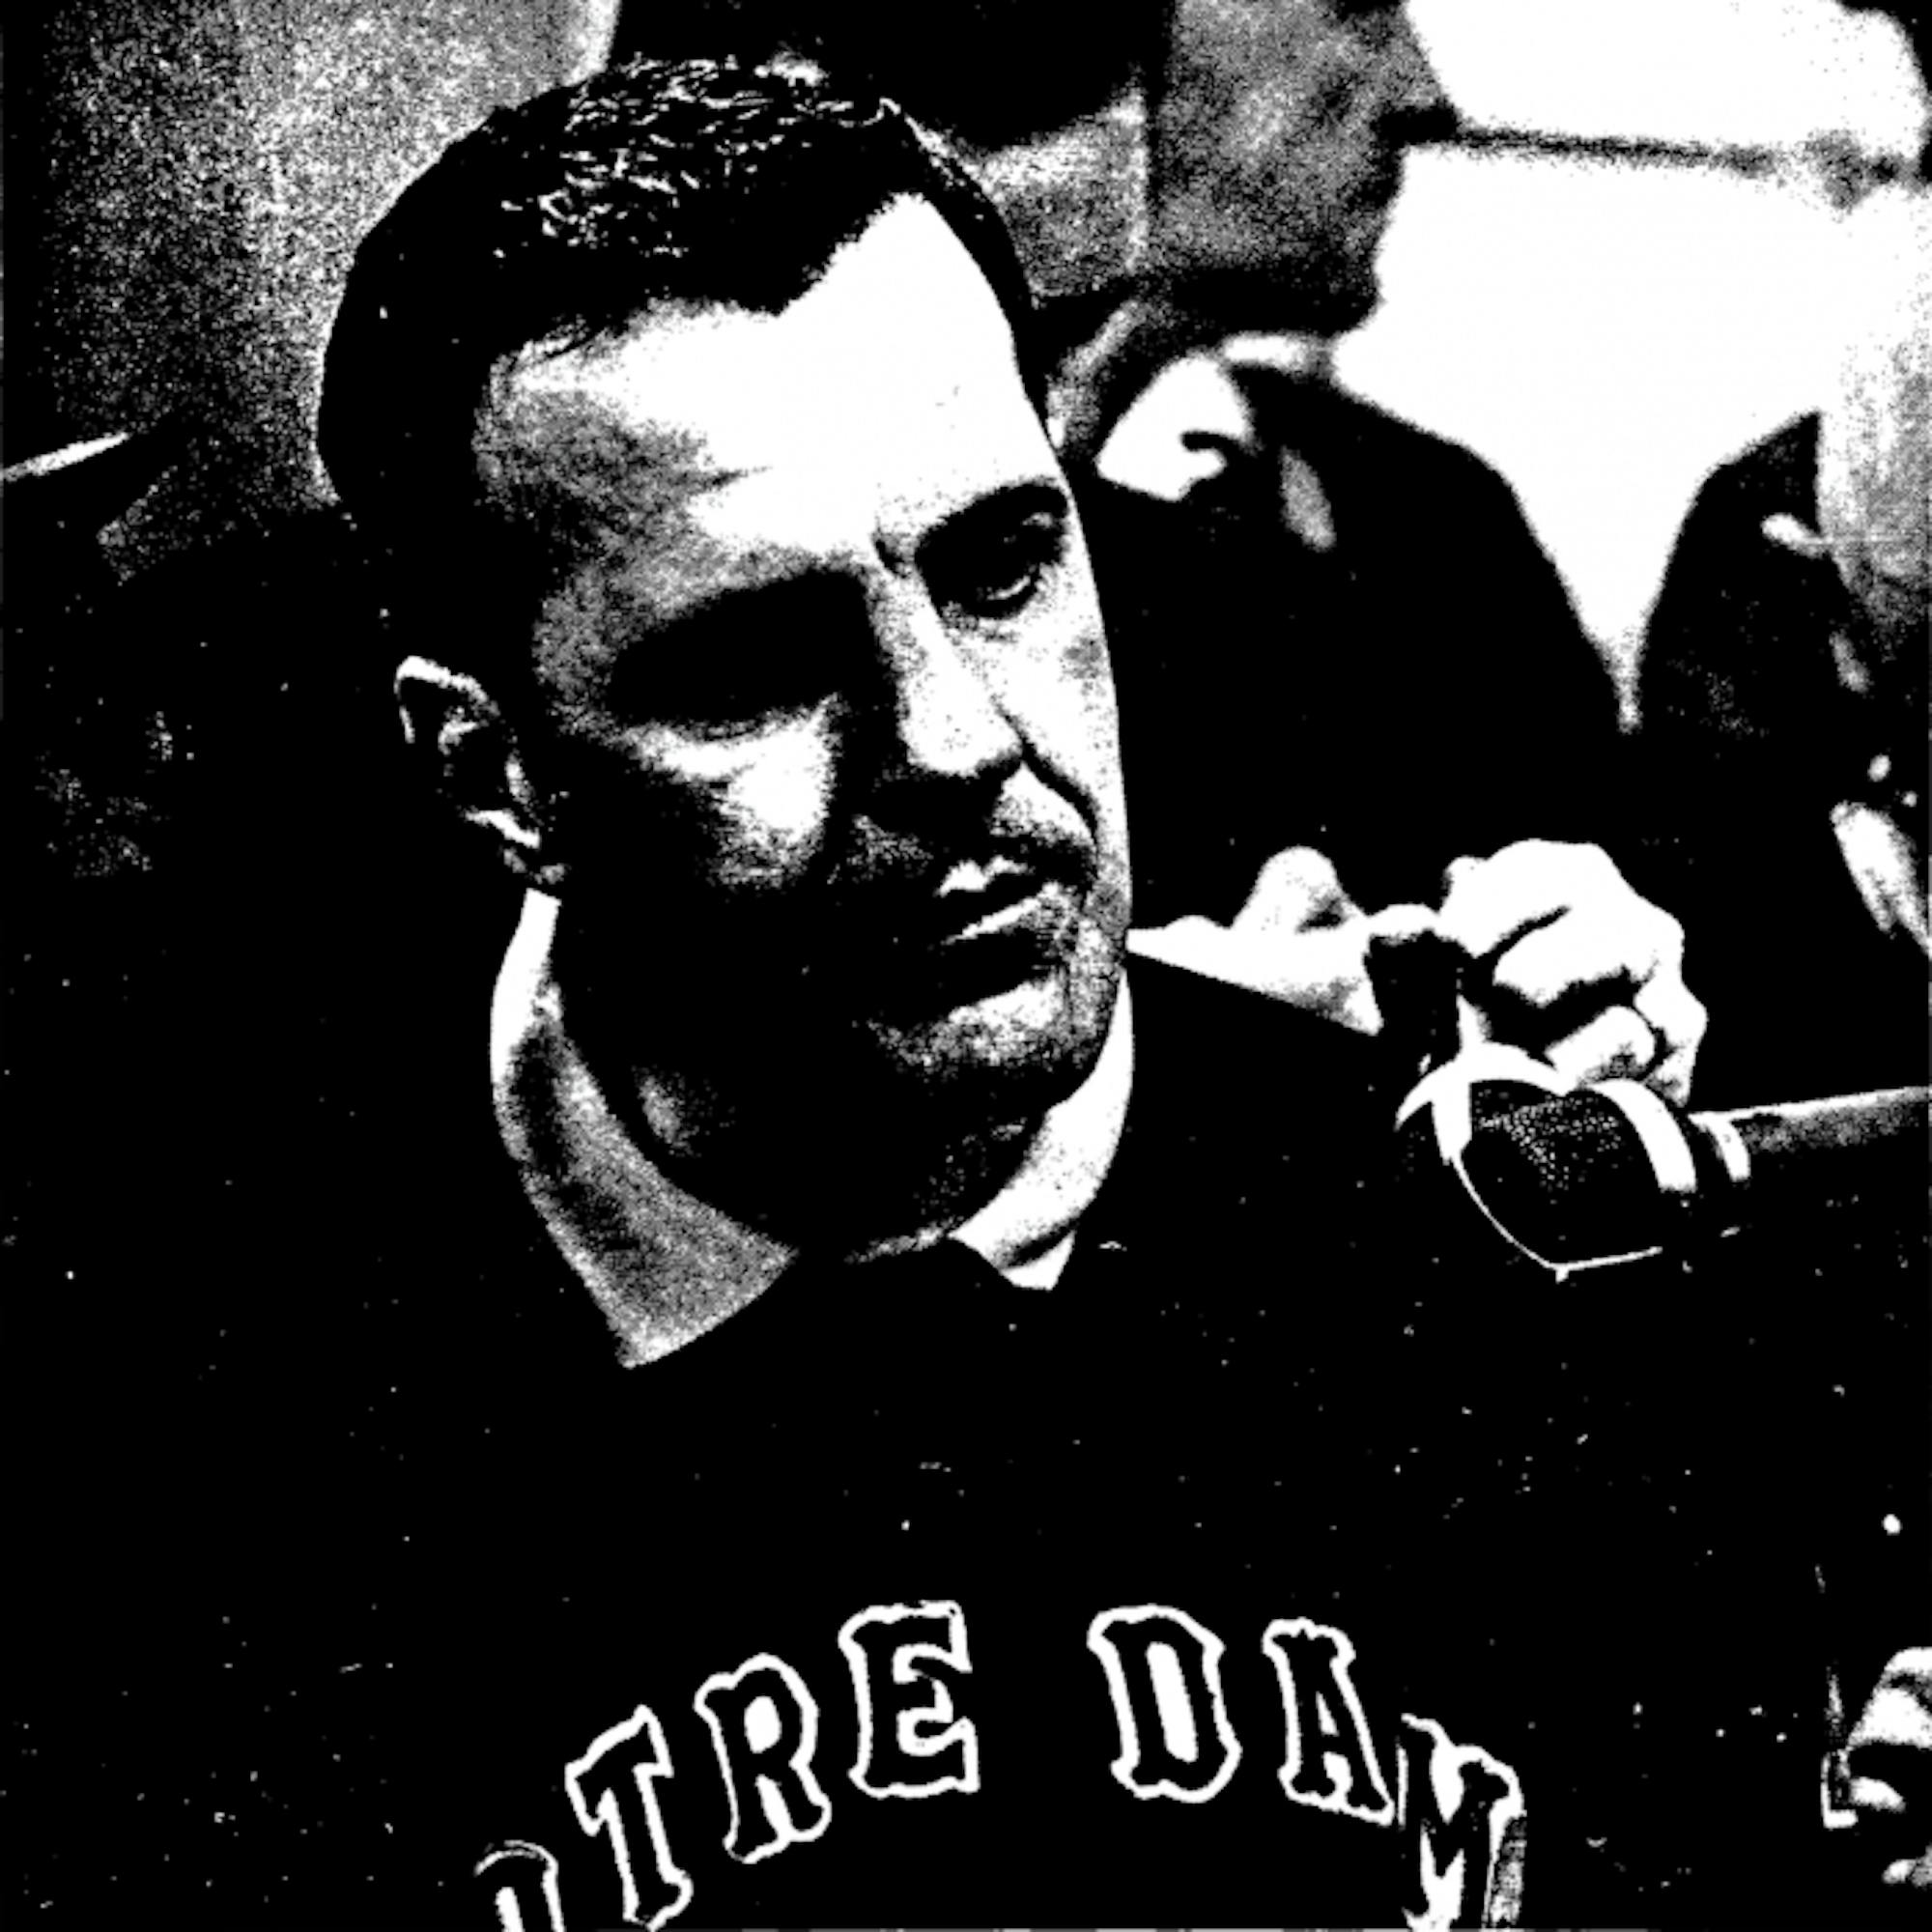 Former Irish head coach Ara Parseghian collects his thoughts before addressing the press following Notre Dame’s 51-0 win over USC on Nov. 26, 1966. The Irish won their first of two championships under Parseghian that year.